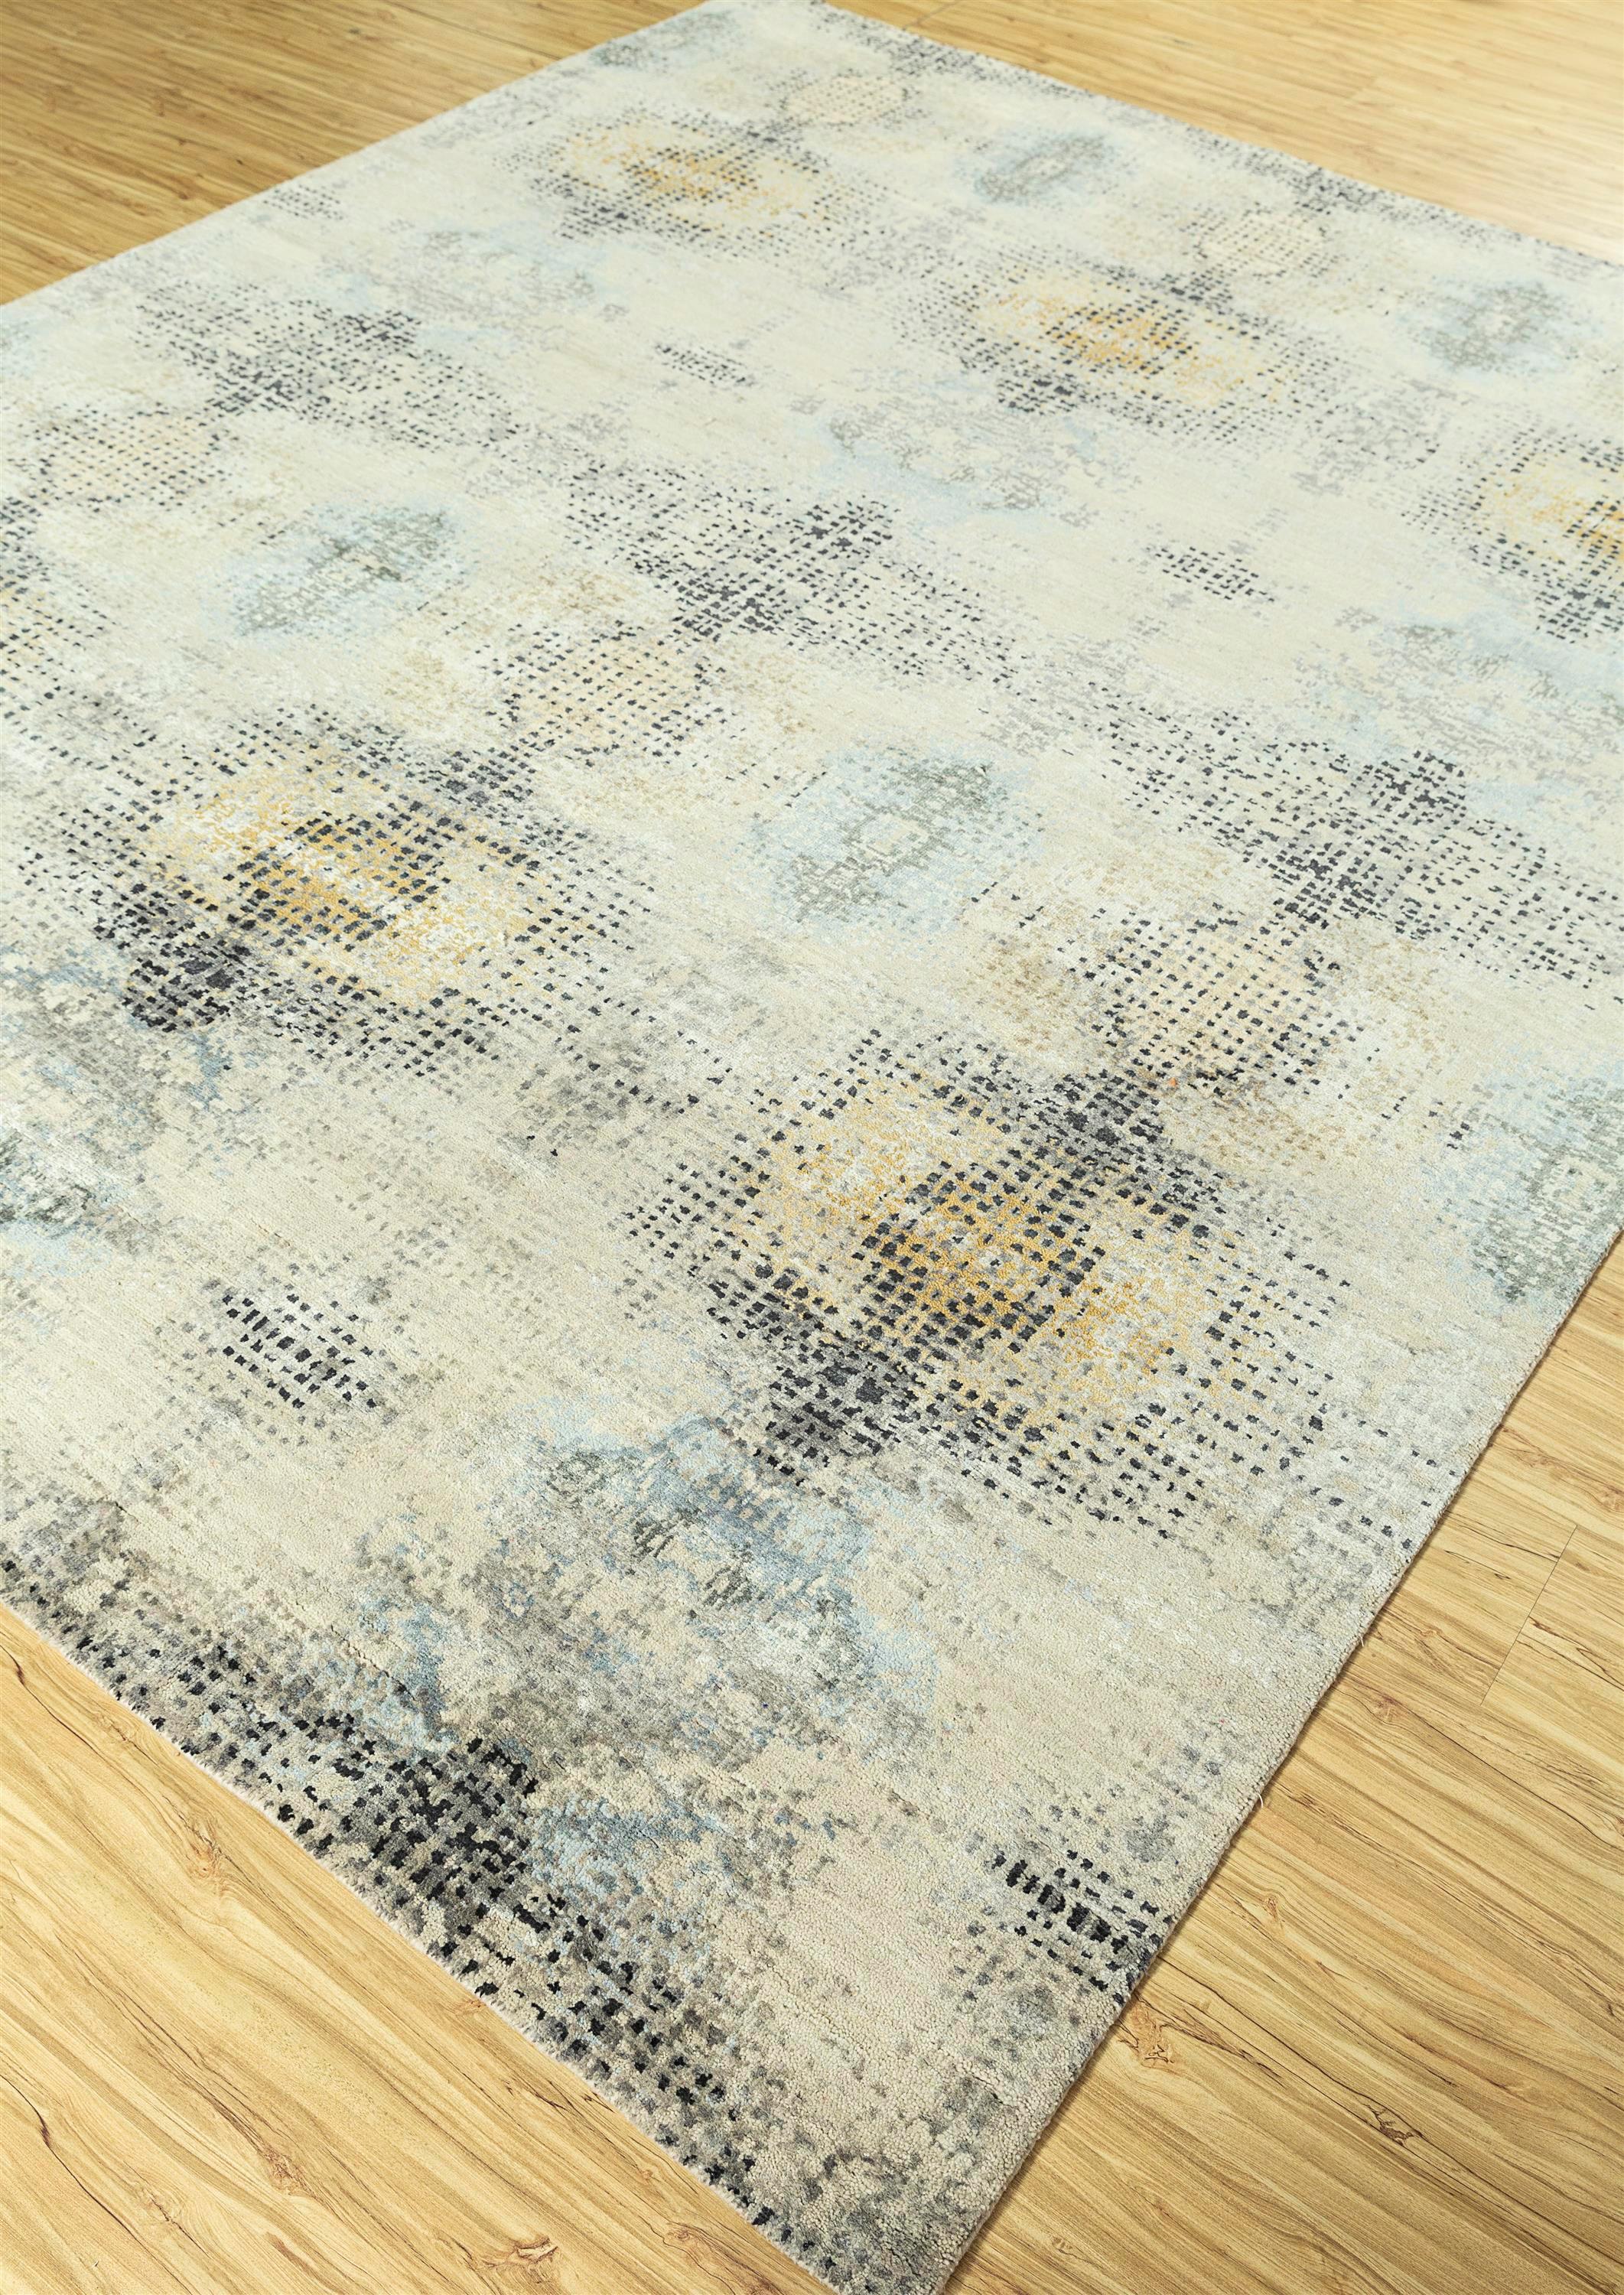 Embark on a journey through the avant-garde with hand-knotted masterpiece. Inspired by the fleeting beauty of unfolding moments, this modern rug is a tribute to those who embrace uncertainty. The design, a celebration of leaps of faith, encapsulates